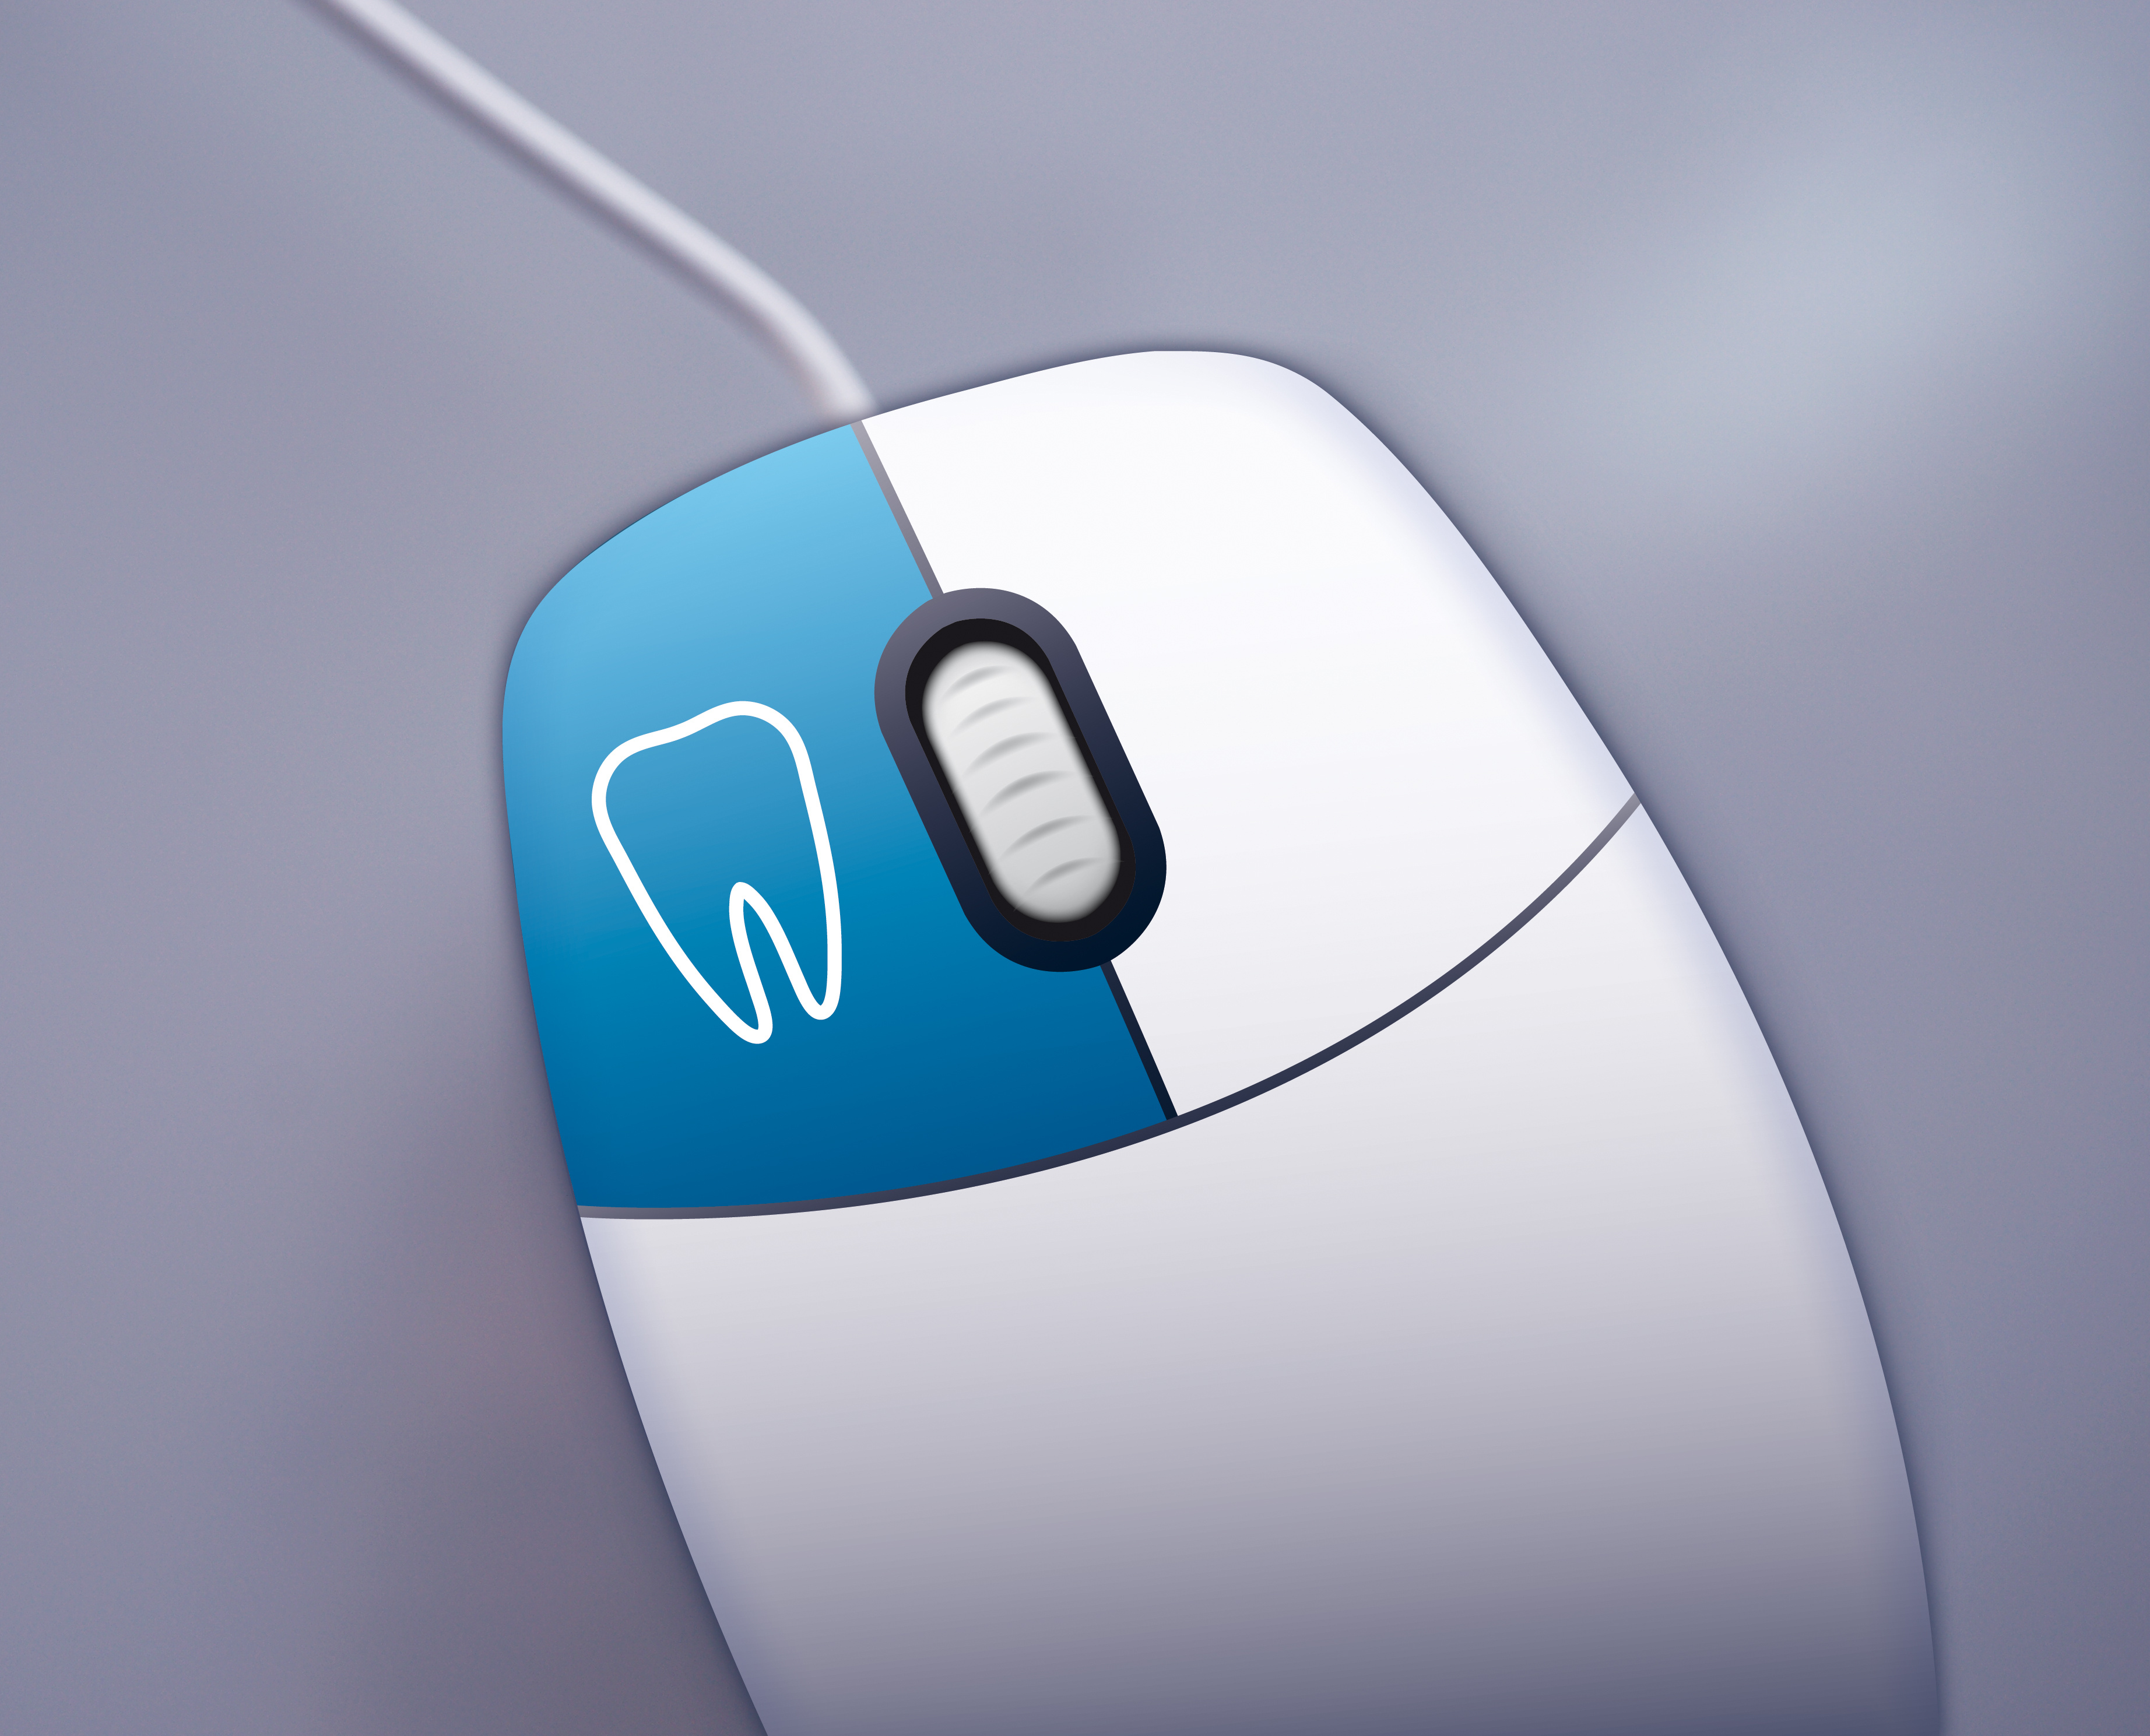 The Best Ways to Market Your Dental Practice: Part 3 - Email Marketing